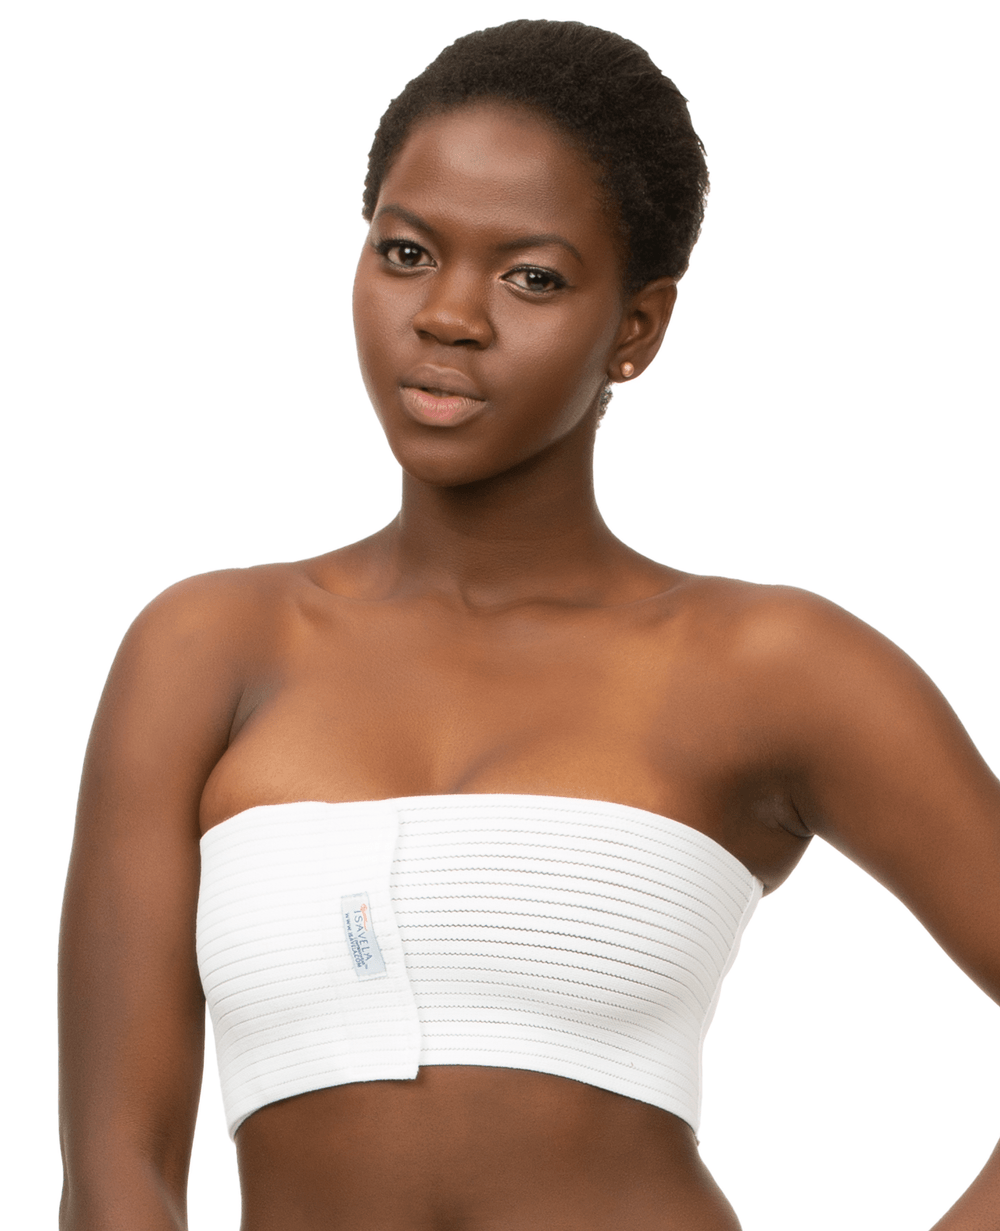 ARMSTRONG AMERIKA Post Op Breast Augmentation Band for Support and Stability